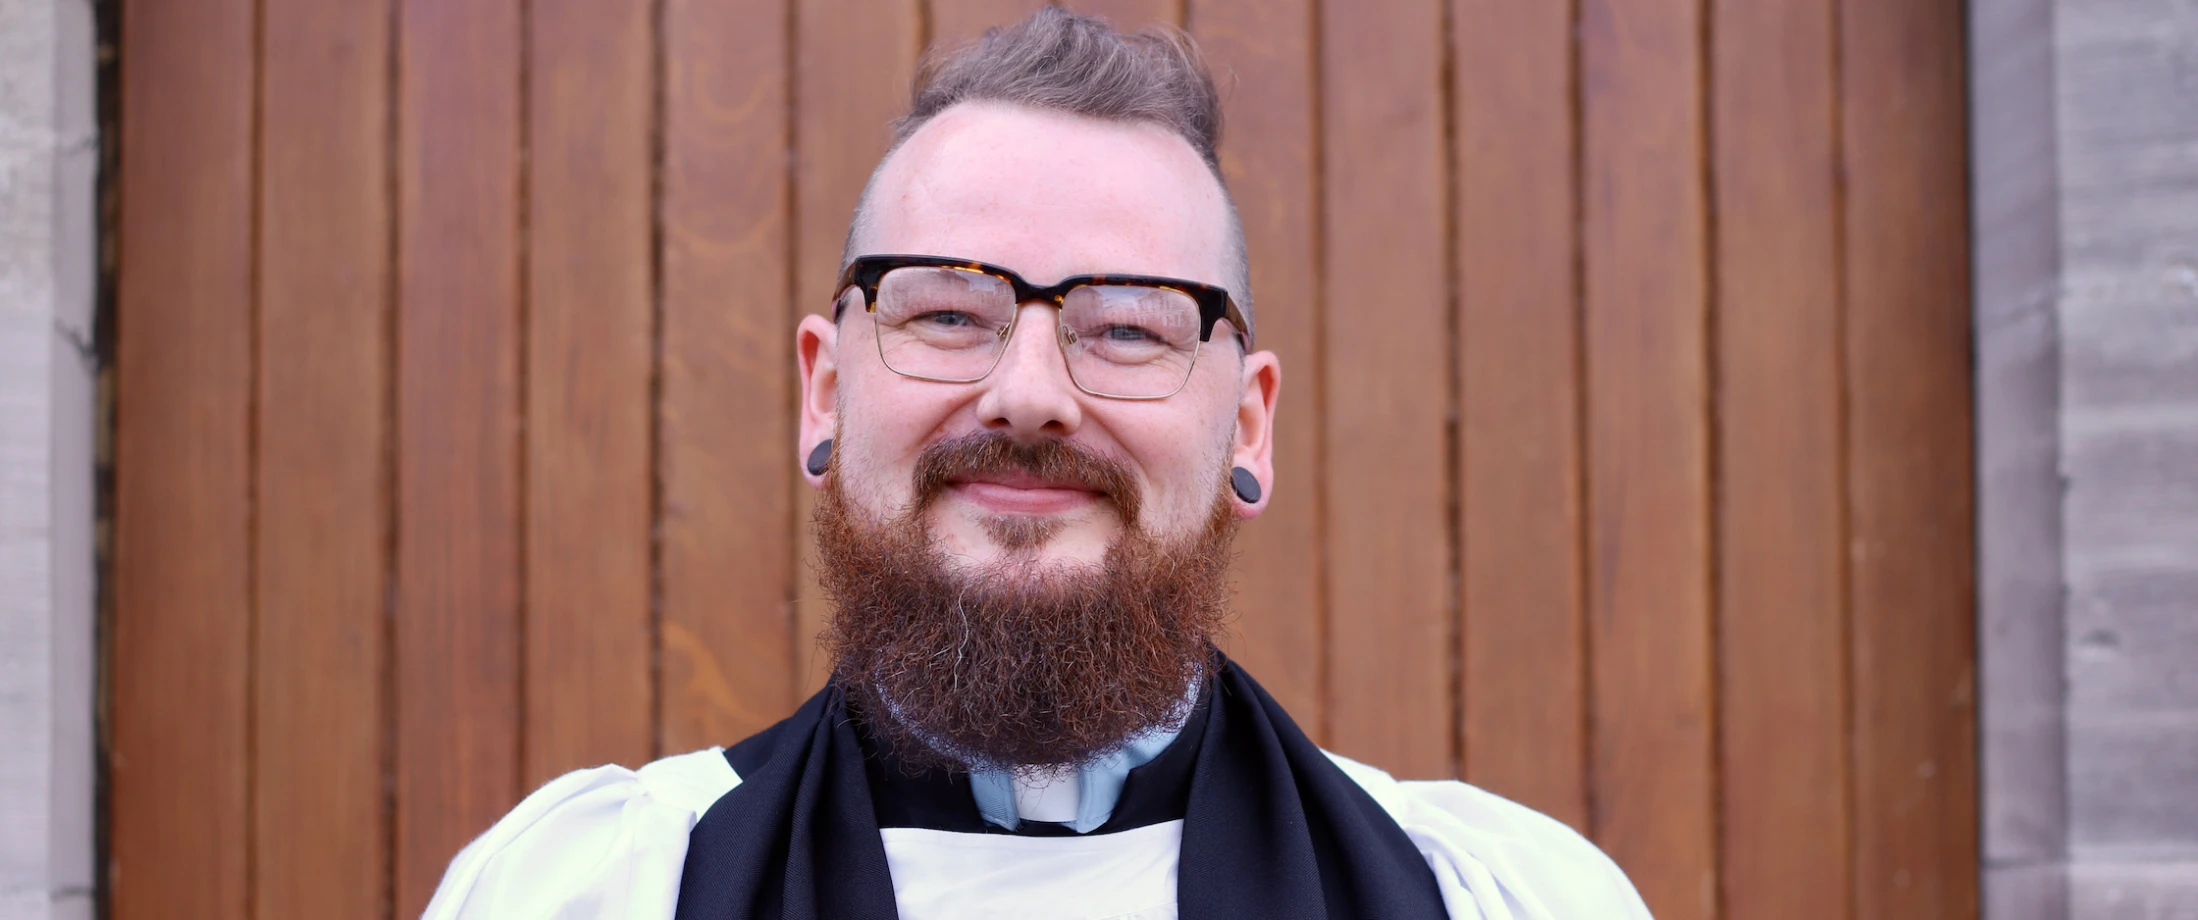 Stu Armstrong is ordained deacon